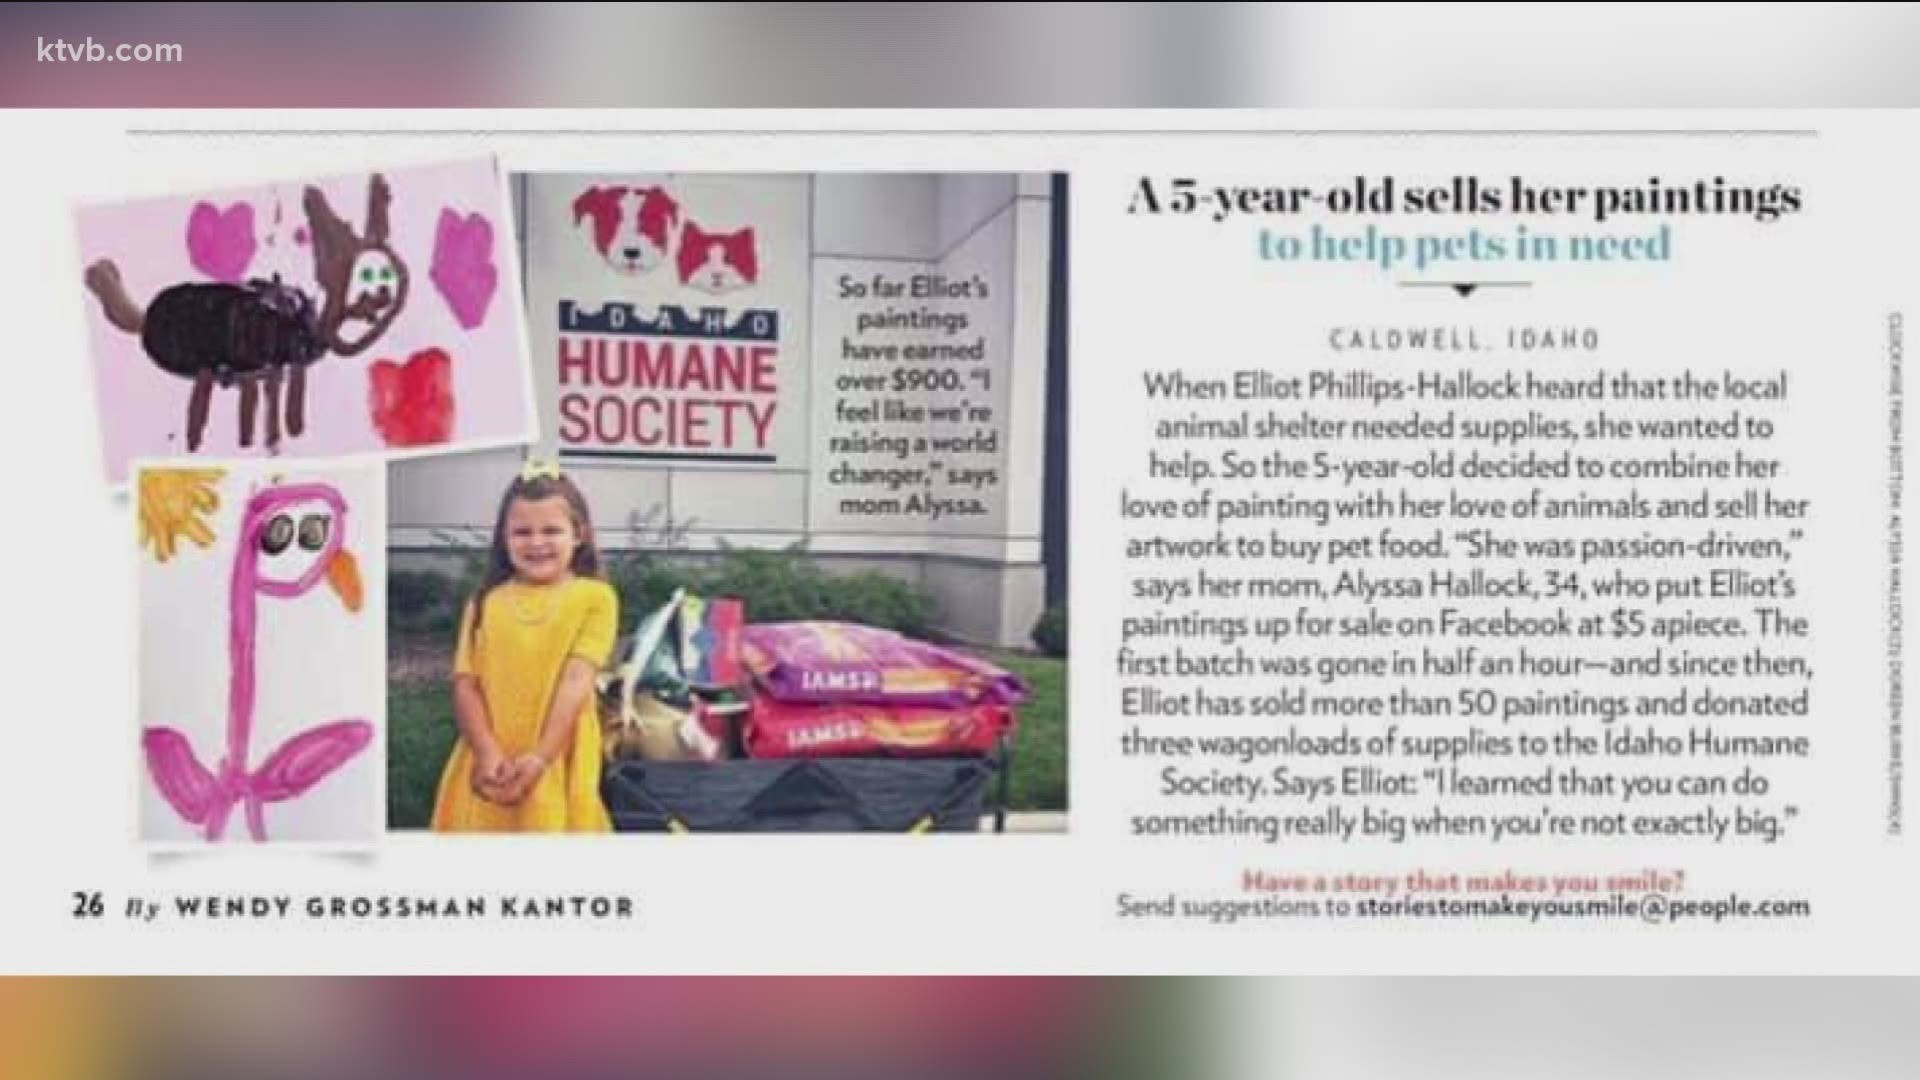 You may remember Elliot Phillips-Hallock, a Seven's Hero who loves to paint and help raise money for the Idaho Humane Society.